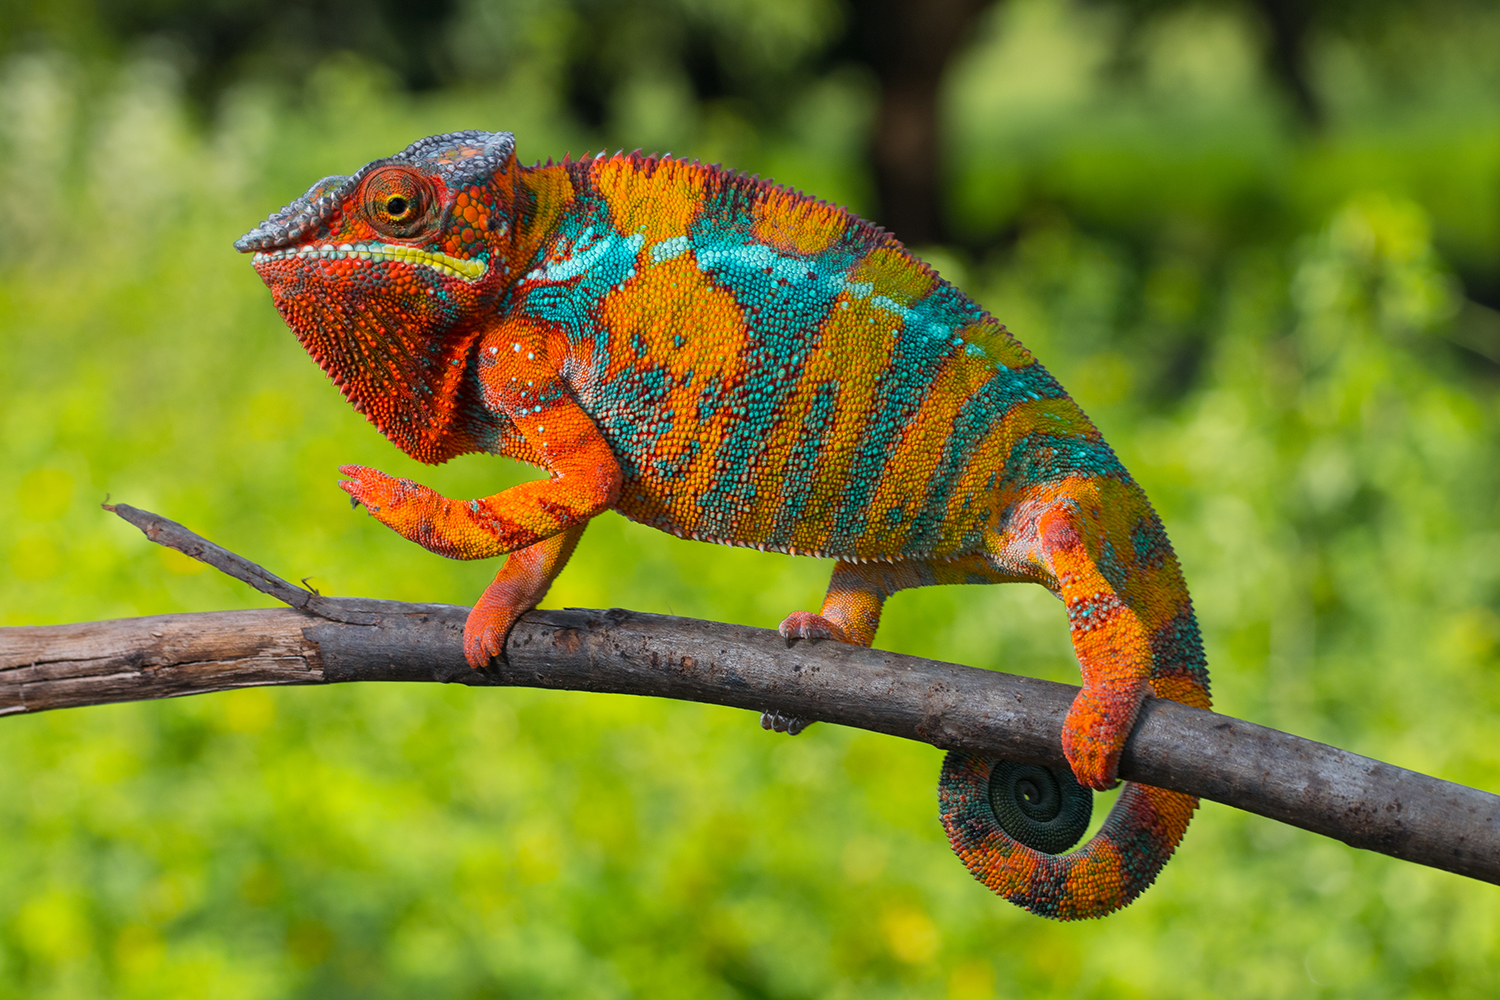 Aggressive fungal pathogen discovered in panther chameleons